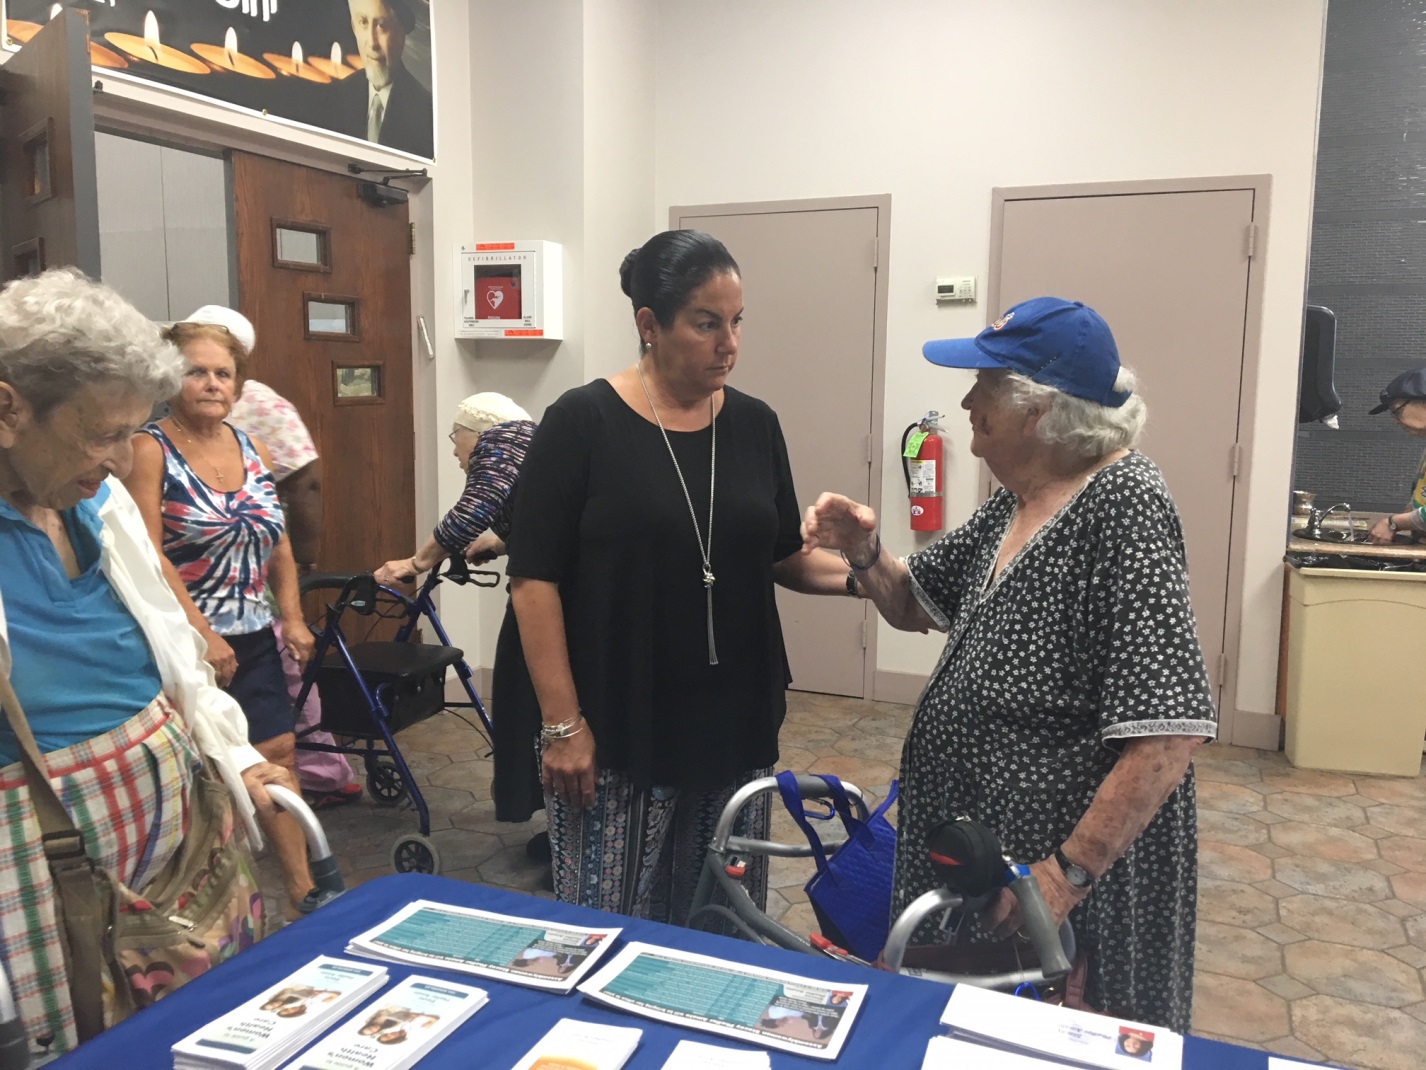 Pheffer Amato and her staff met with constituents face to face, discussed concerns about quality of life and other issues, and took down contact information to ensure proper follow up at her district offices.